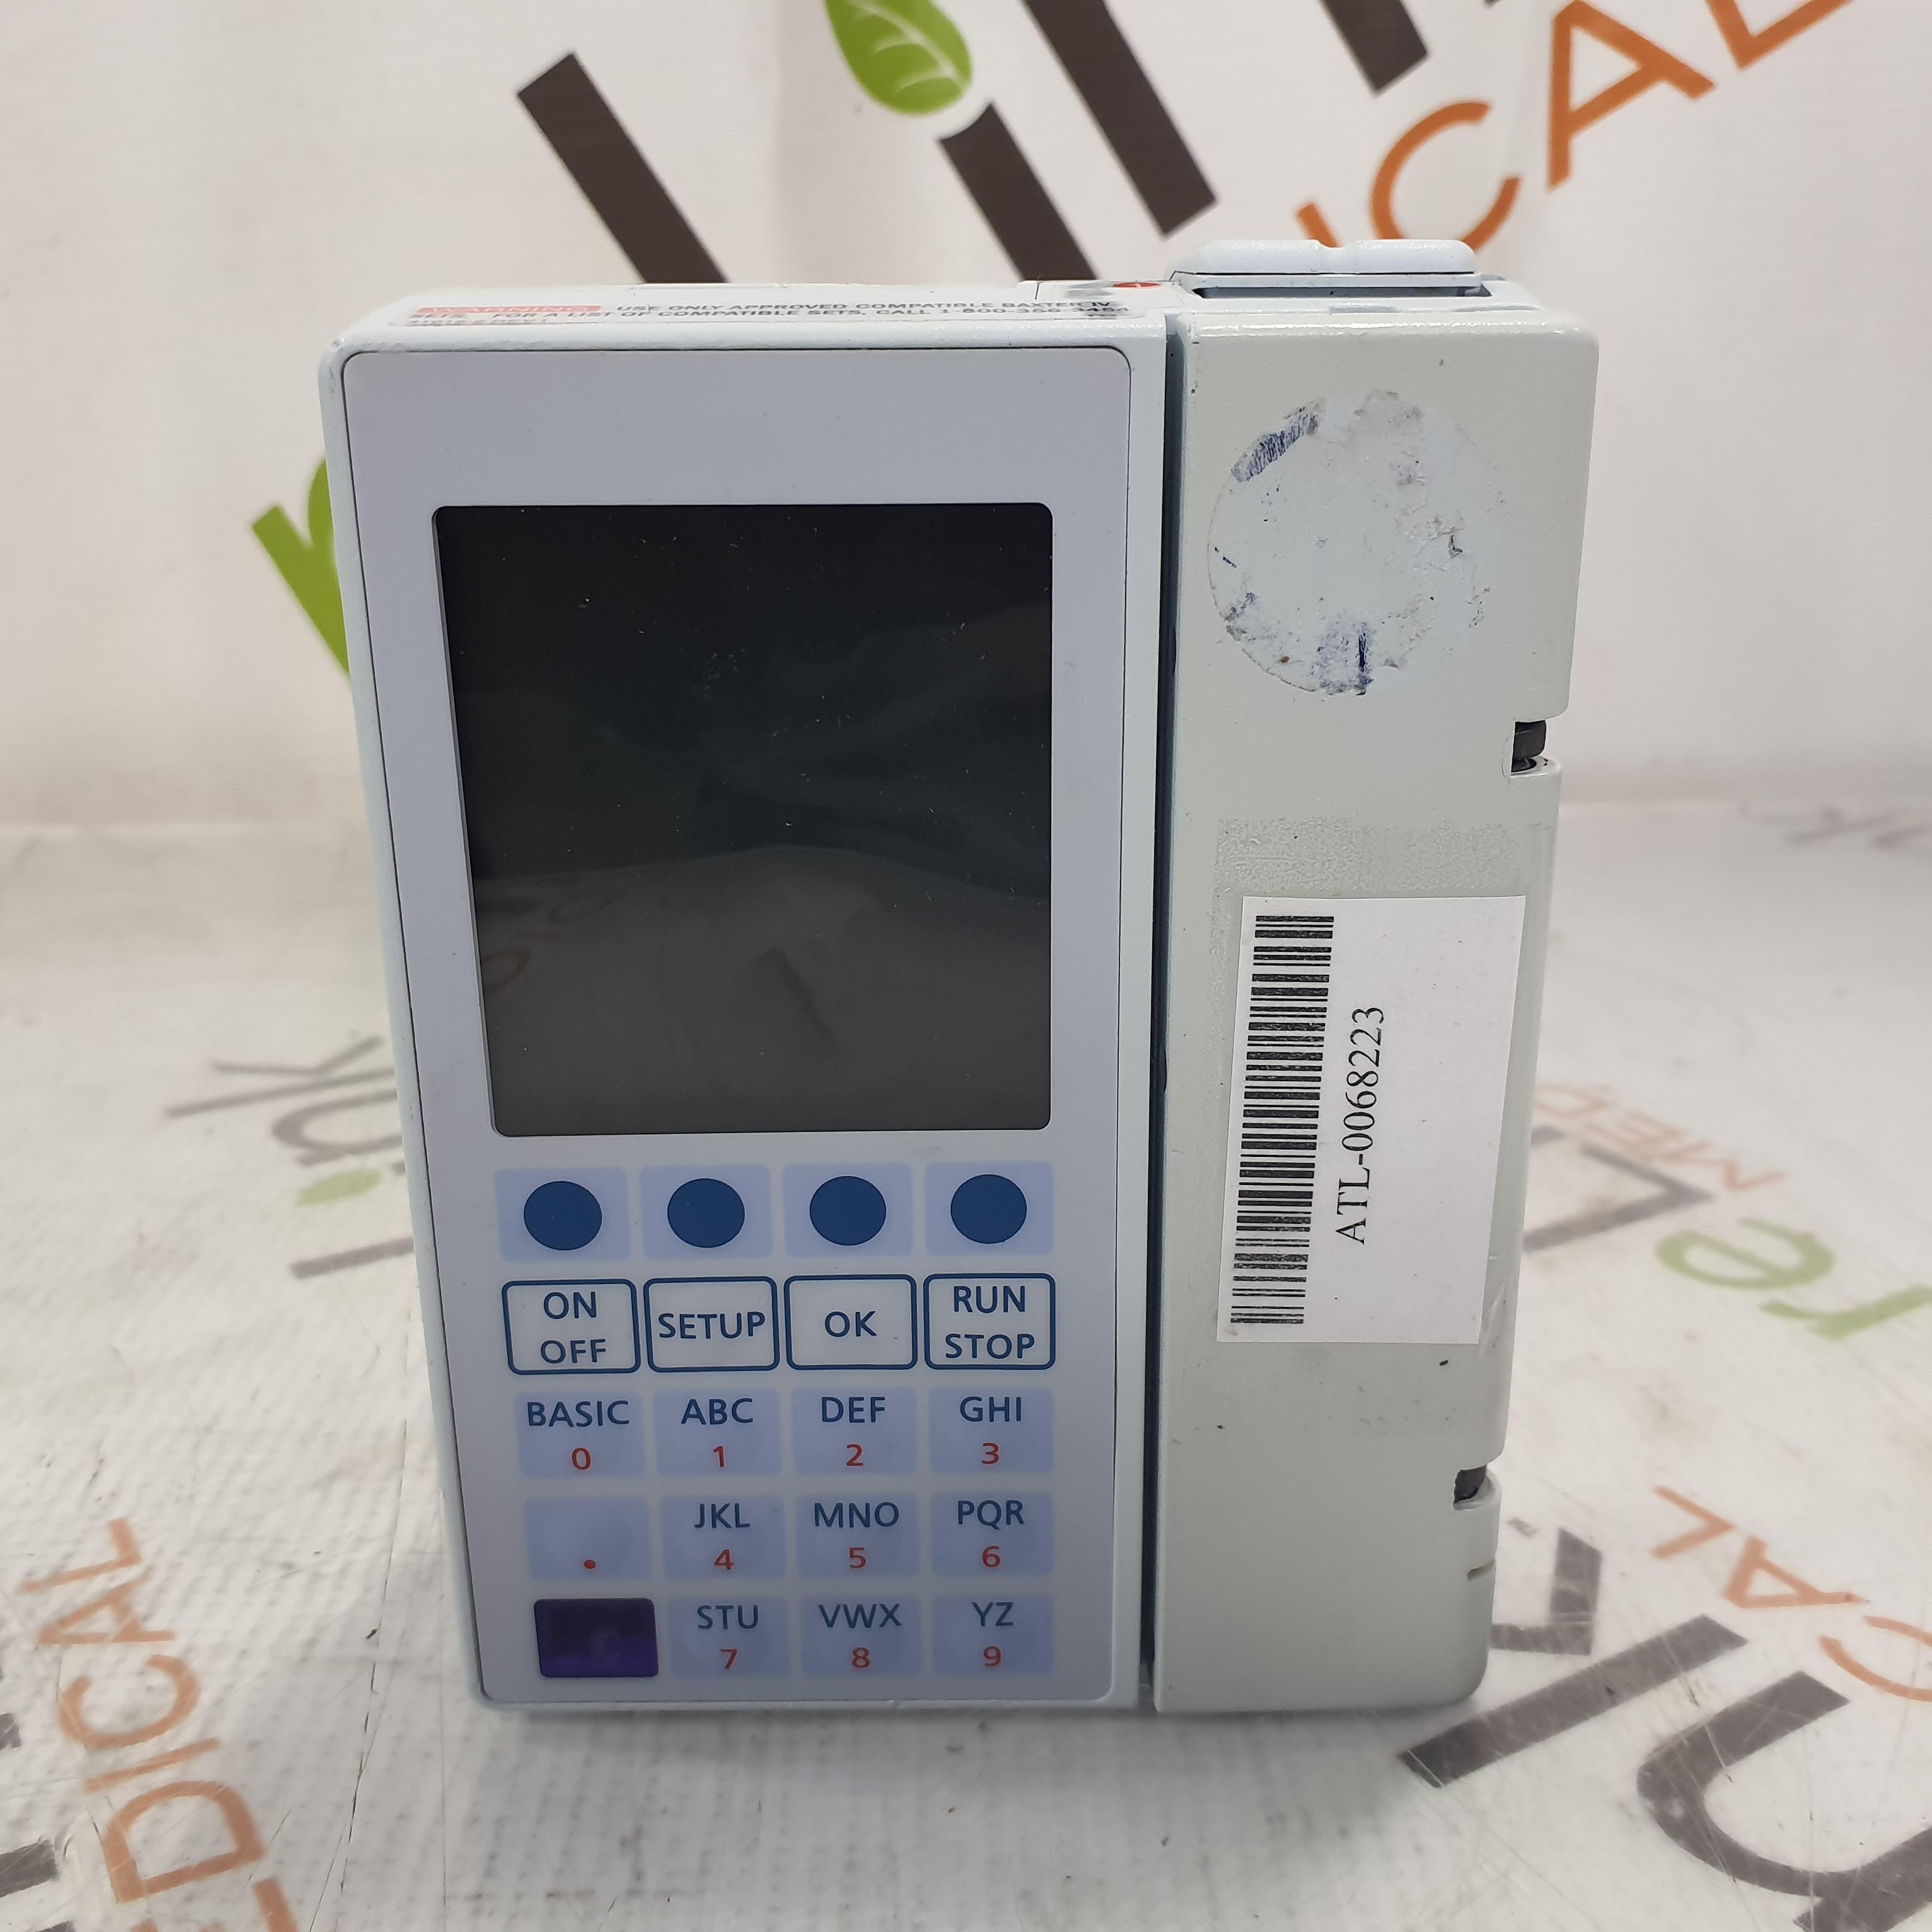 Baxter Sigma Spectrum w/Non Wireless or No Battery Infusion Pump - 379870